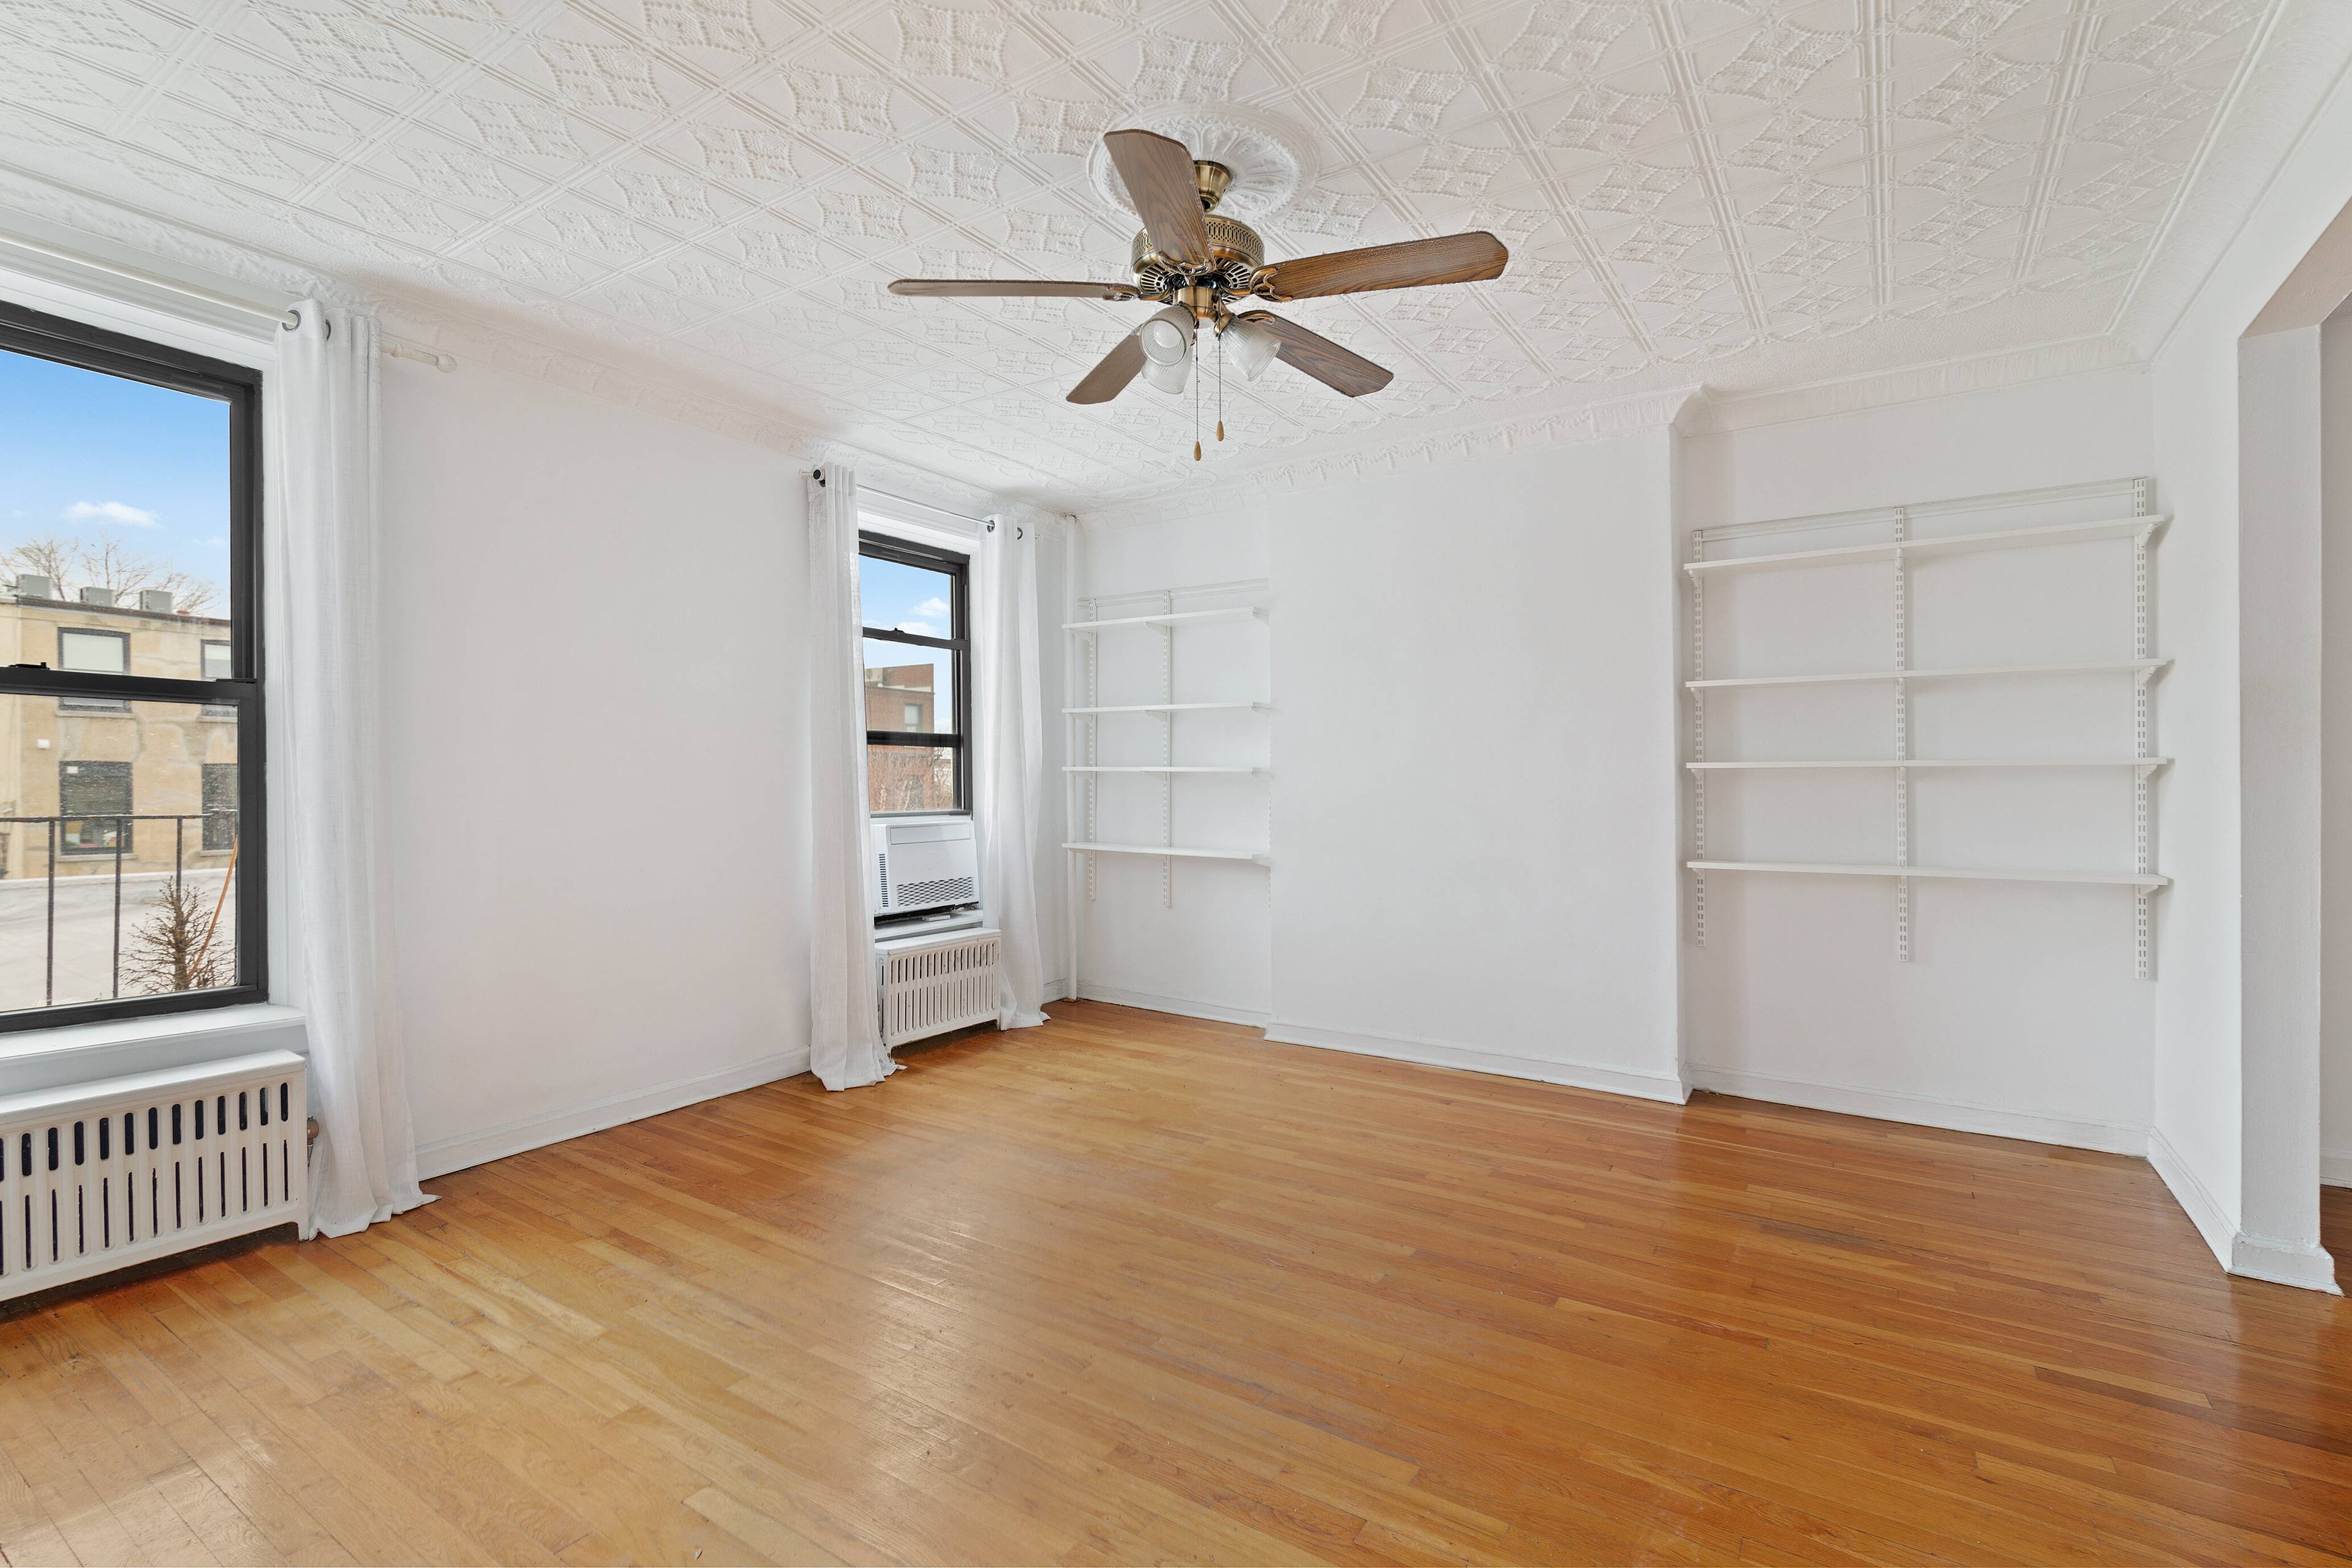 This spacious 2 bedroom apartment in the heart of one of Brooklyn's most charming neighborhoods is everything you have been searching for.